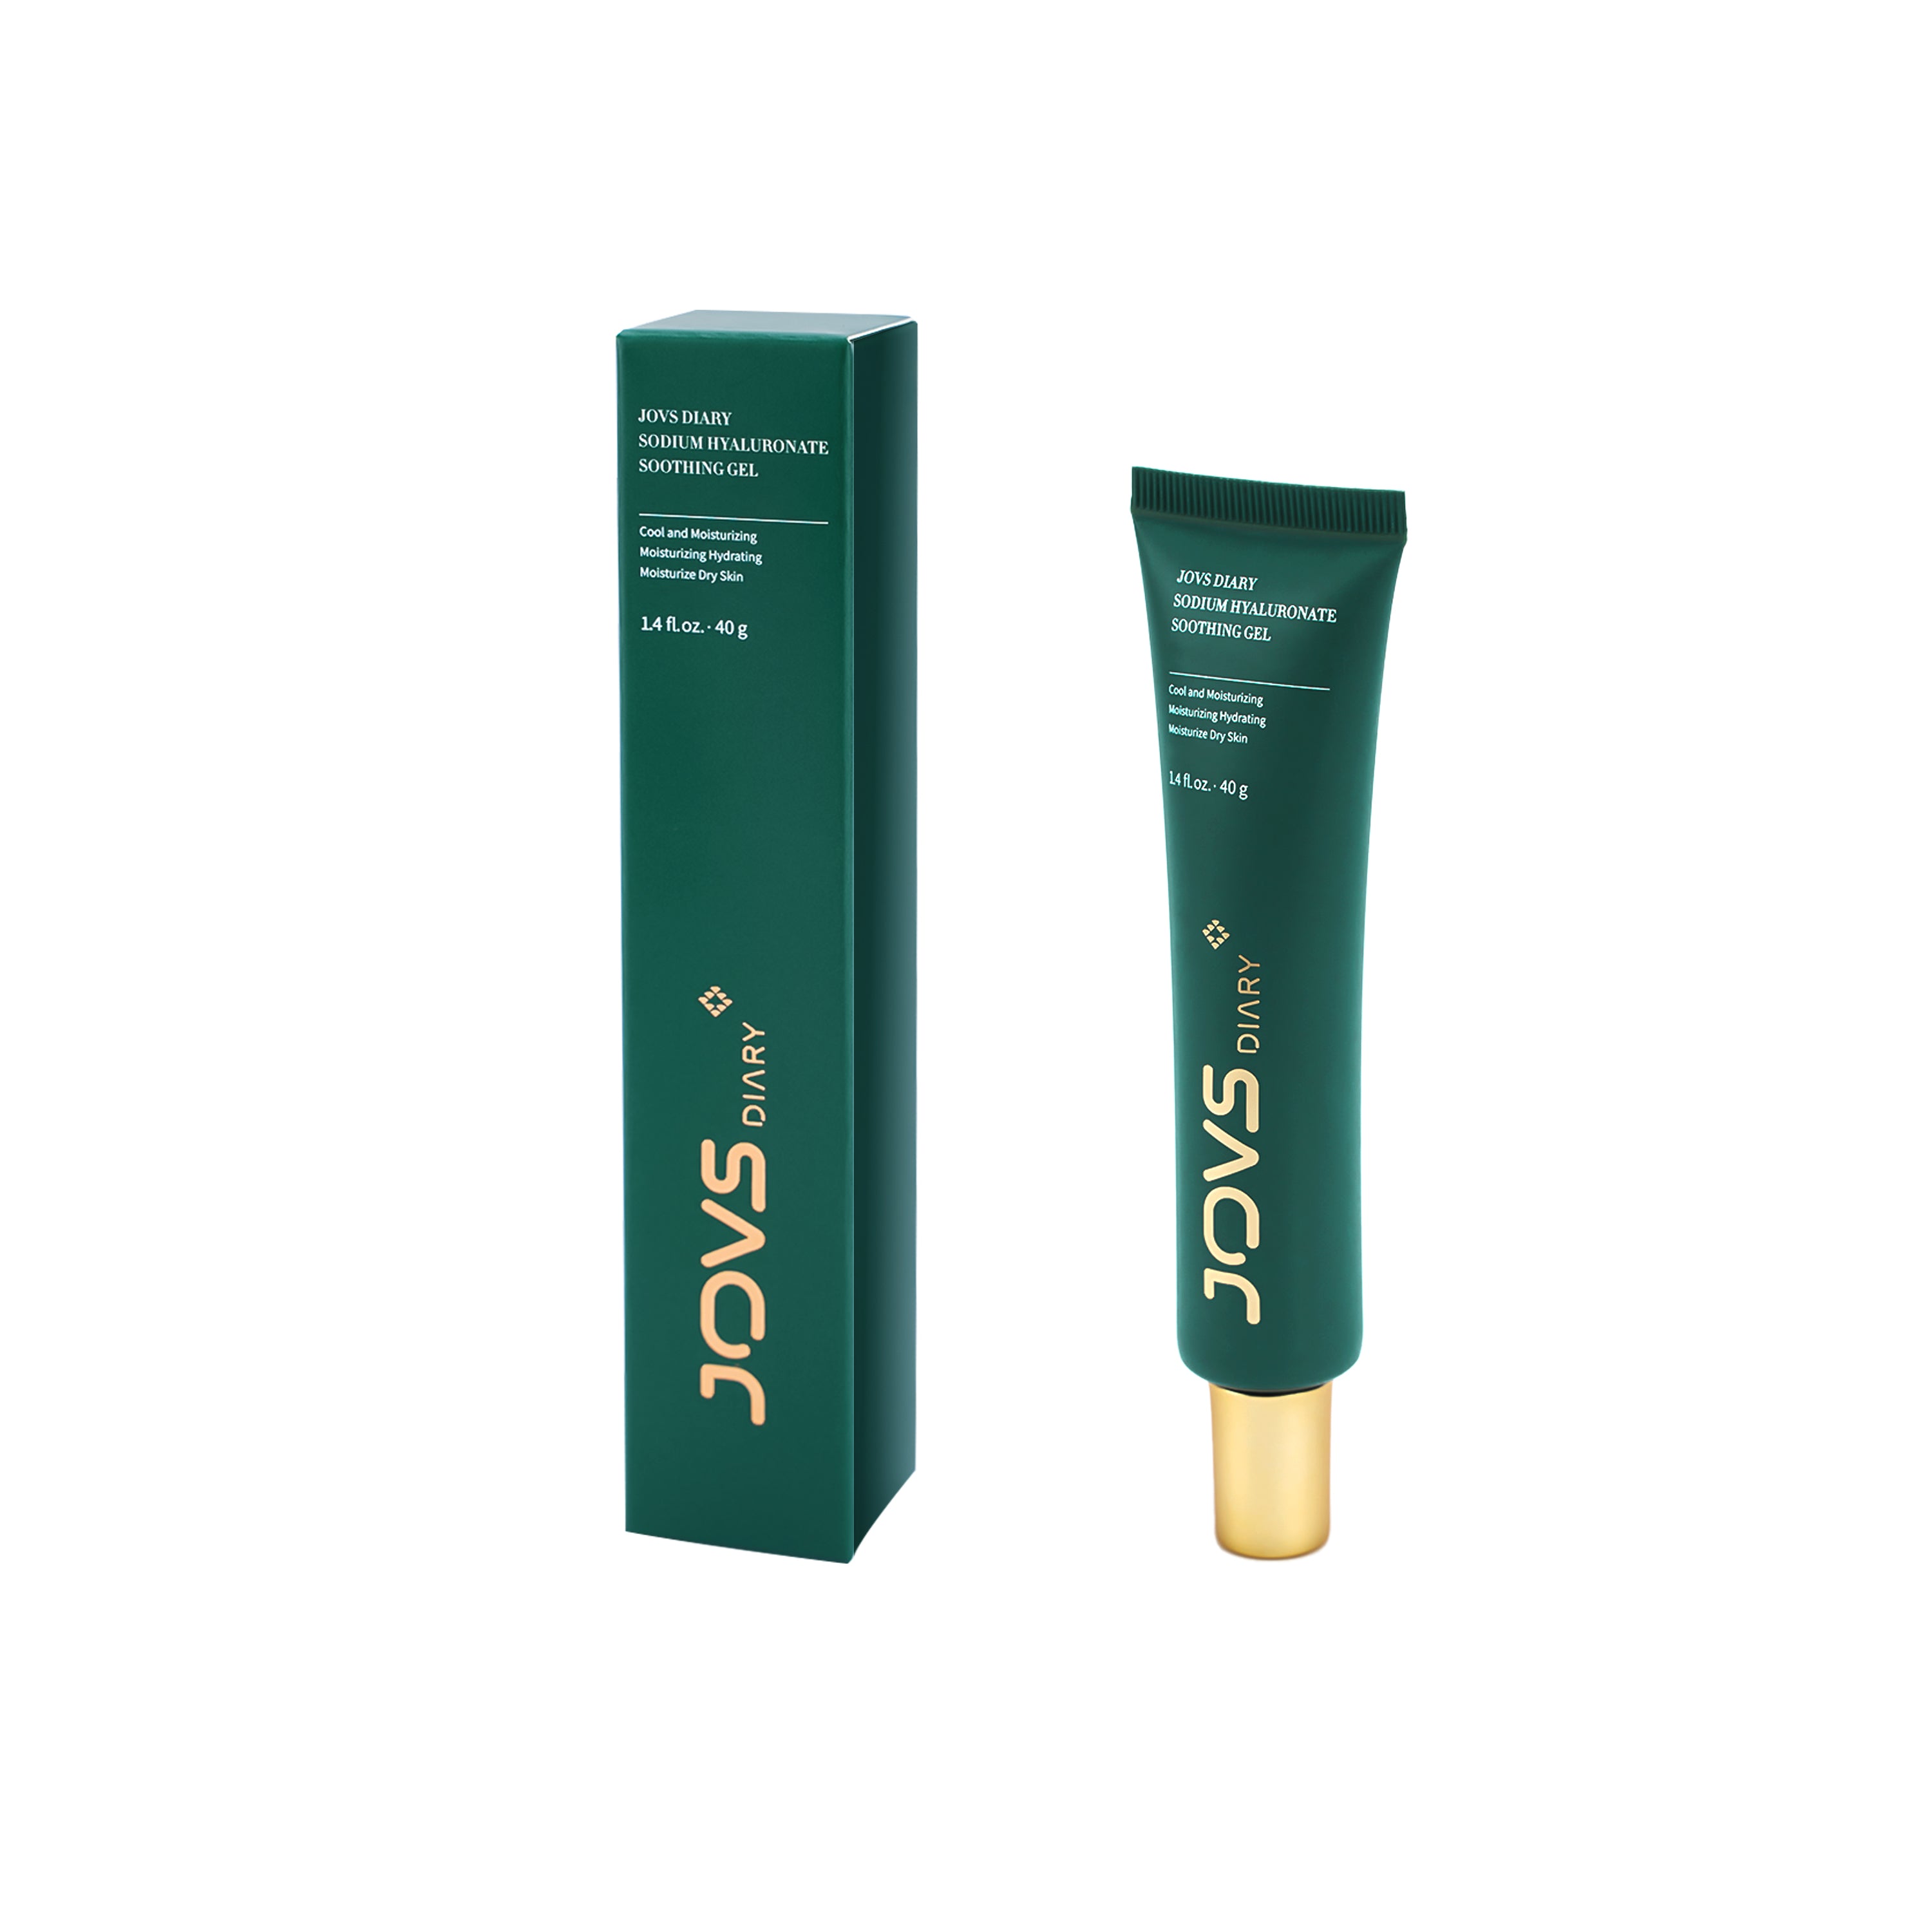 JOVS DIARY Soothing Gel with Sodium Hyaluronate for Deep Hydration and Skin Soothing.